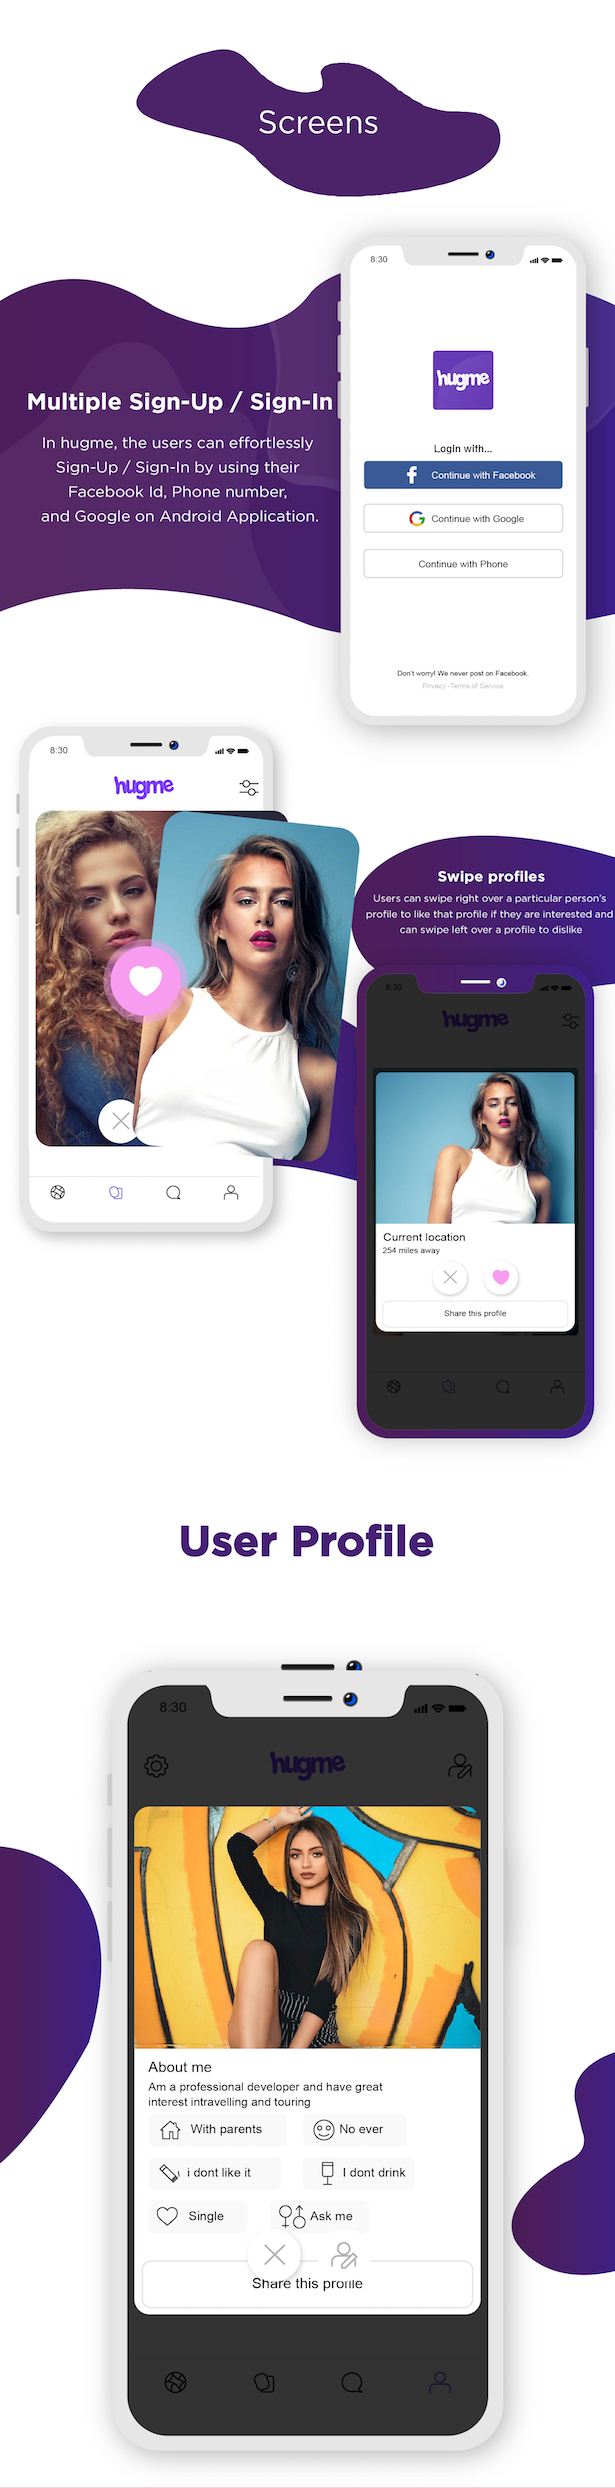 Hugme - Android Native Dating App with Audio Video Calls and Live Streaming - 6